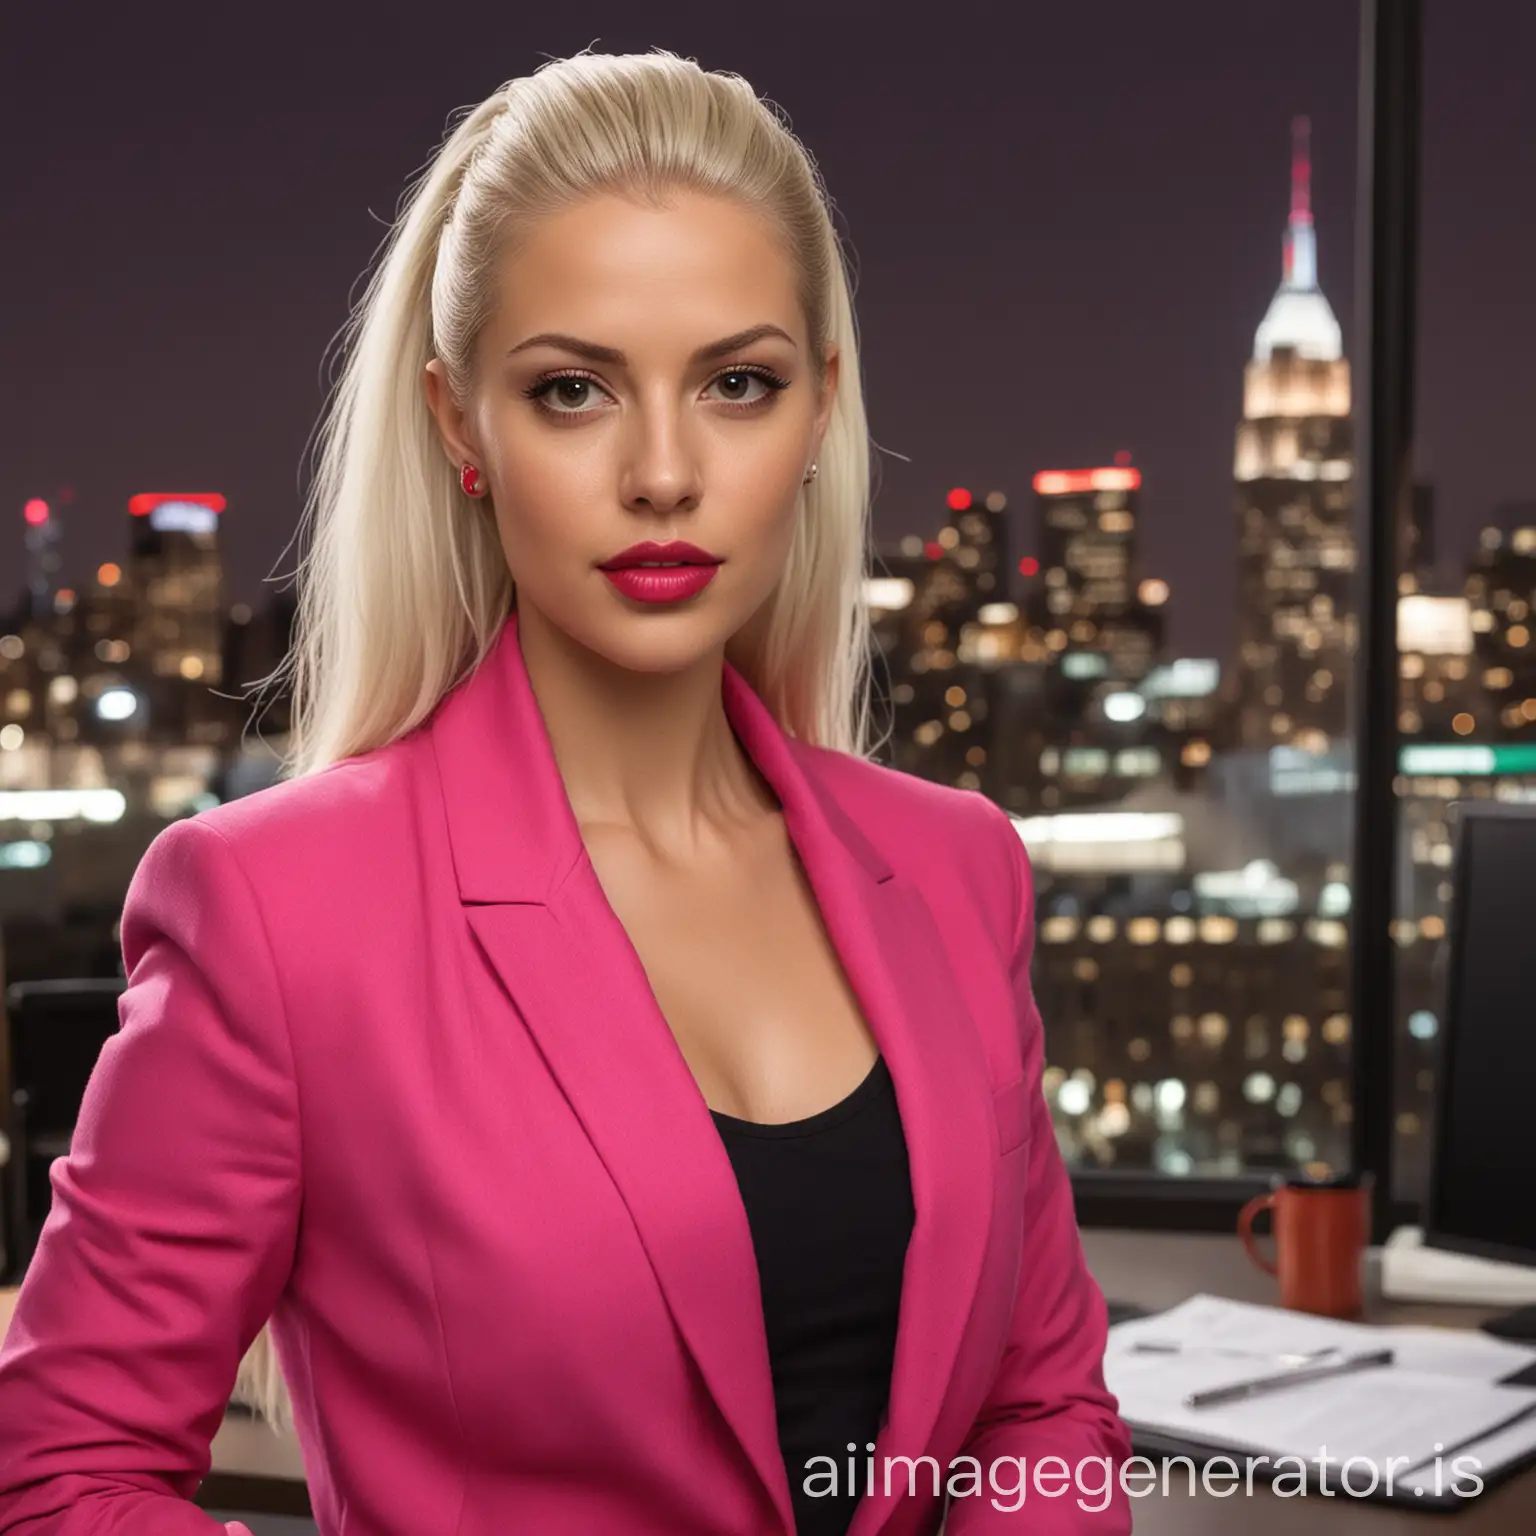 Serious-Businesswoman-in-Hot-Pink-Blazer-at-Nighttime-Office